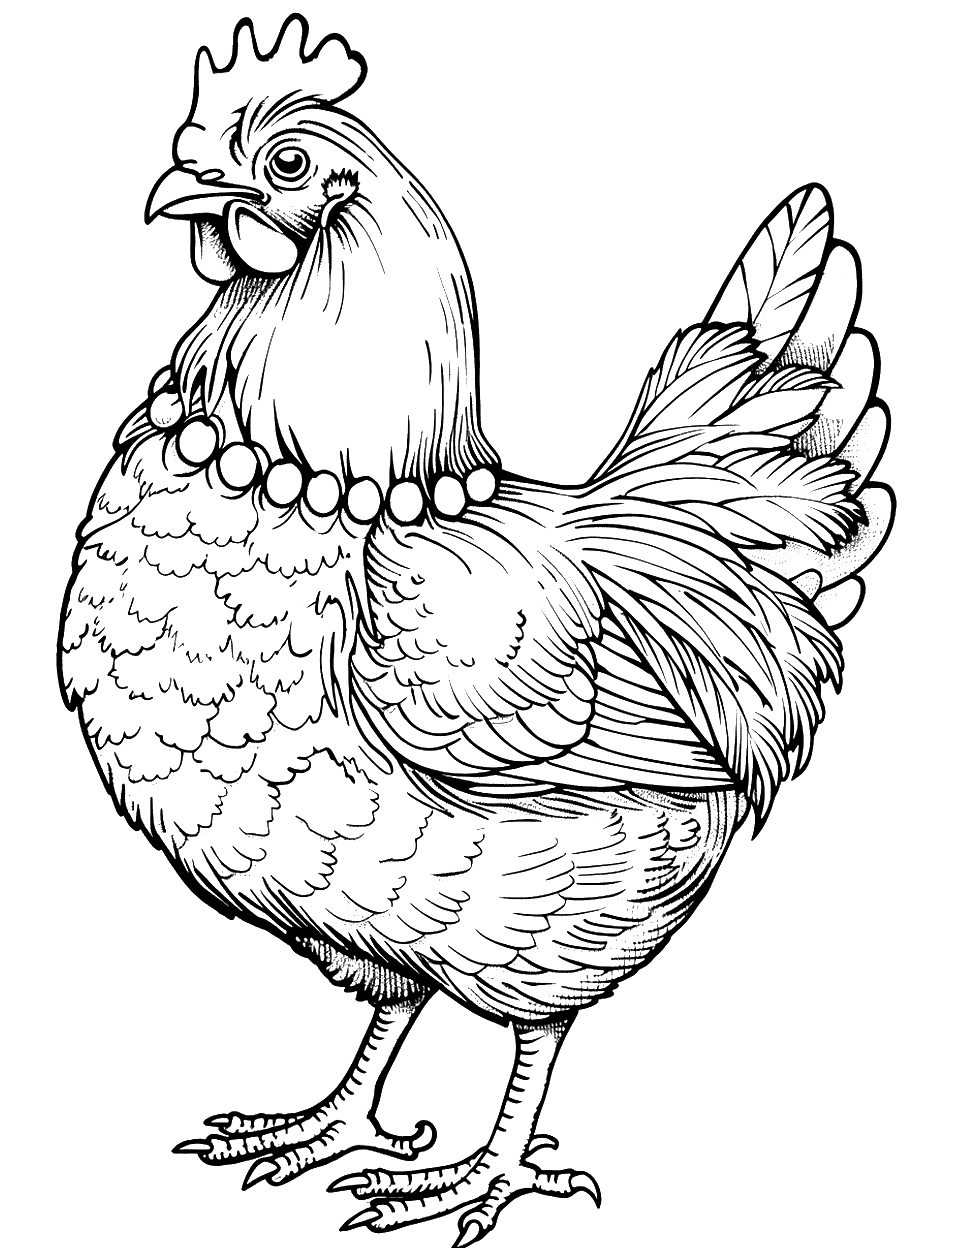 Hen with a Necklace of Grains Chicken Coloring Page - An elegant hen adorned with a necklace made of golden grains.